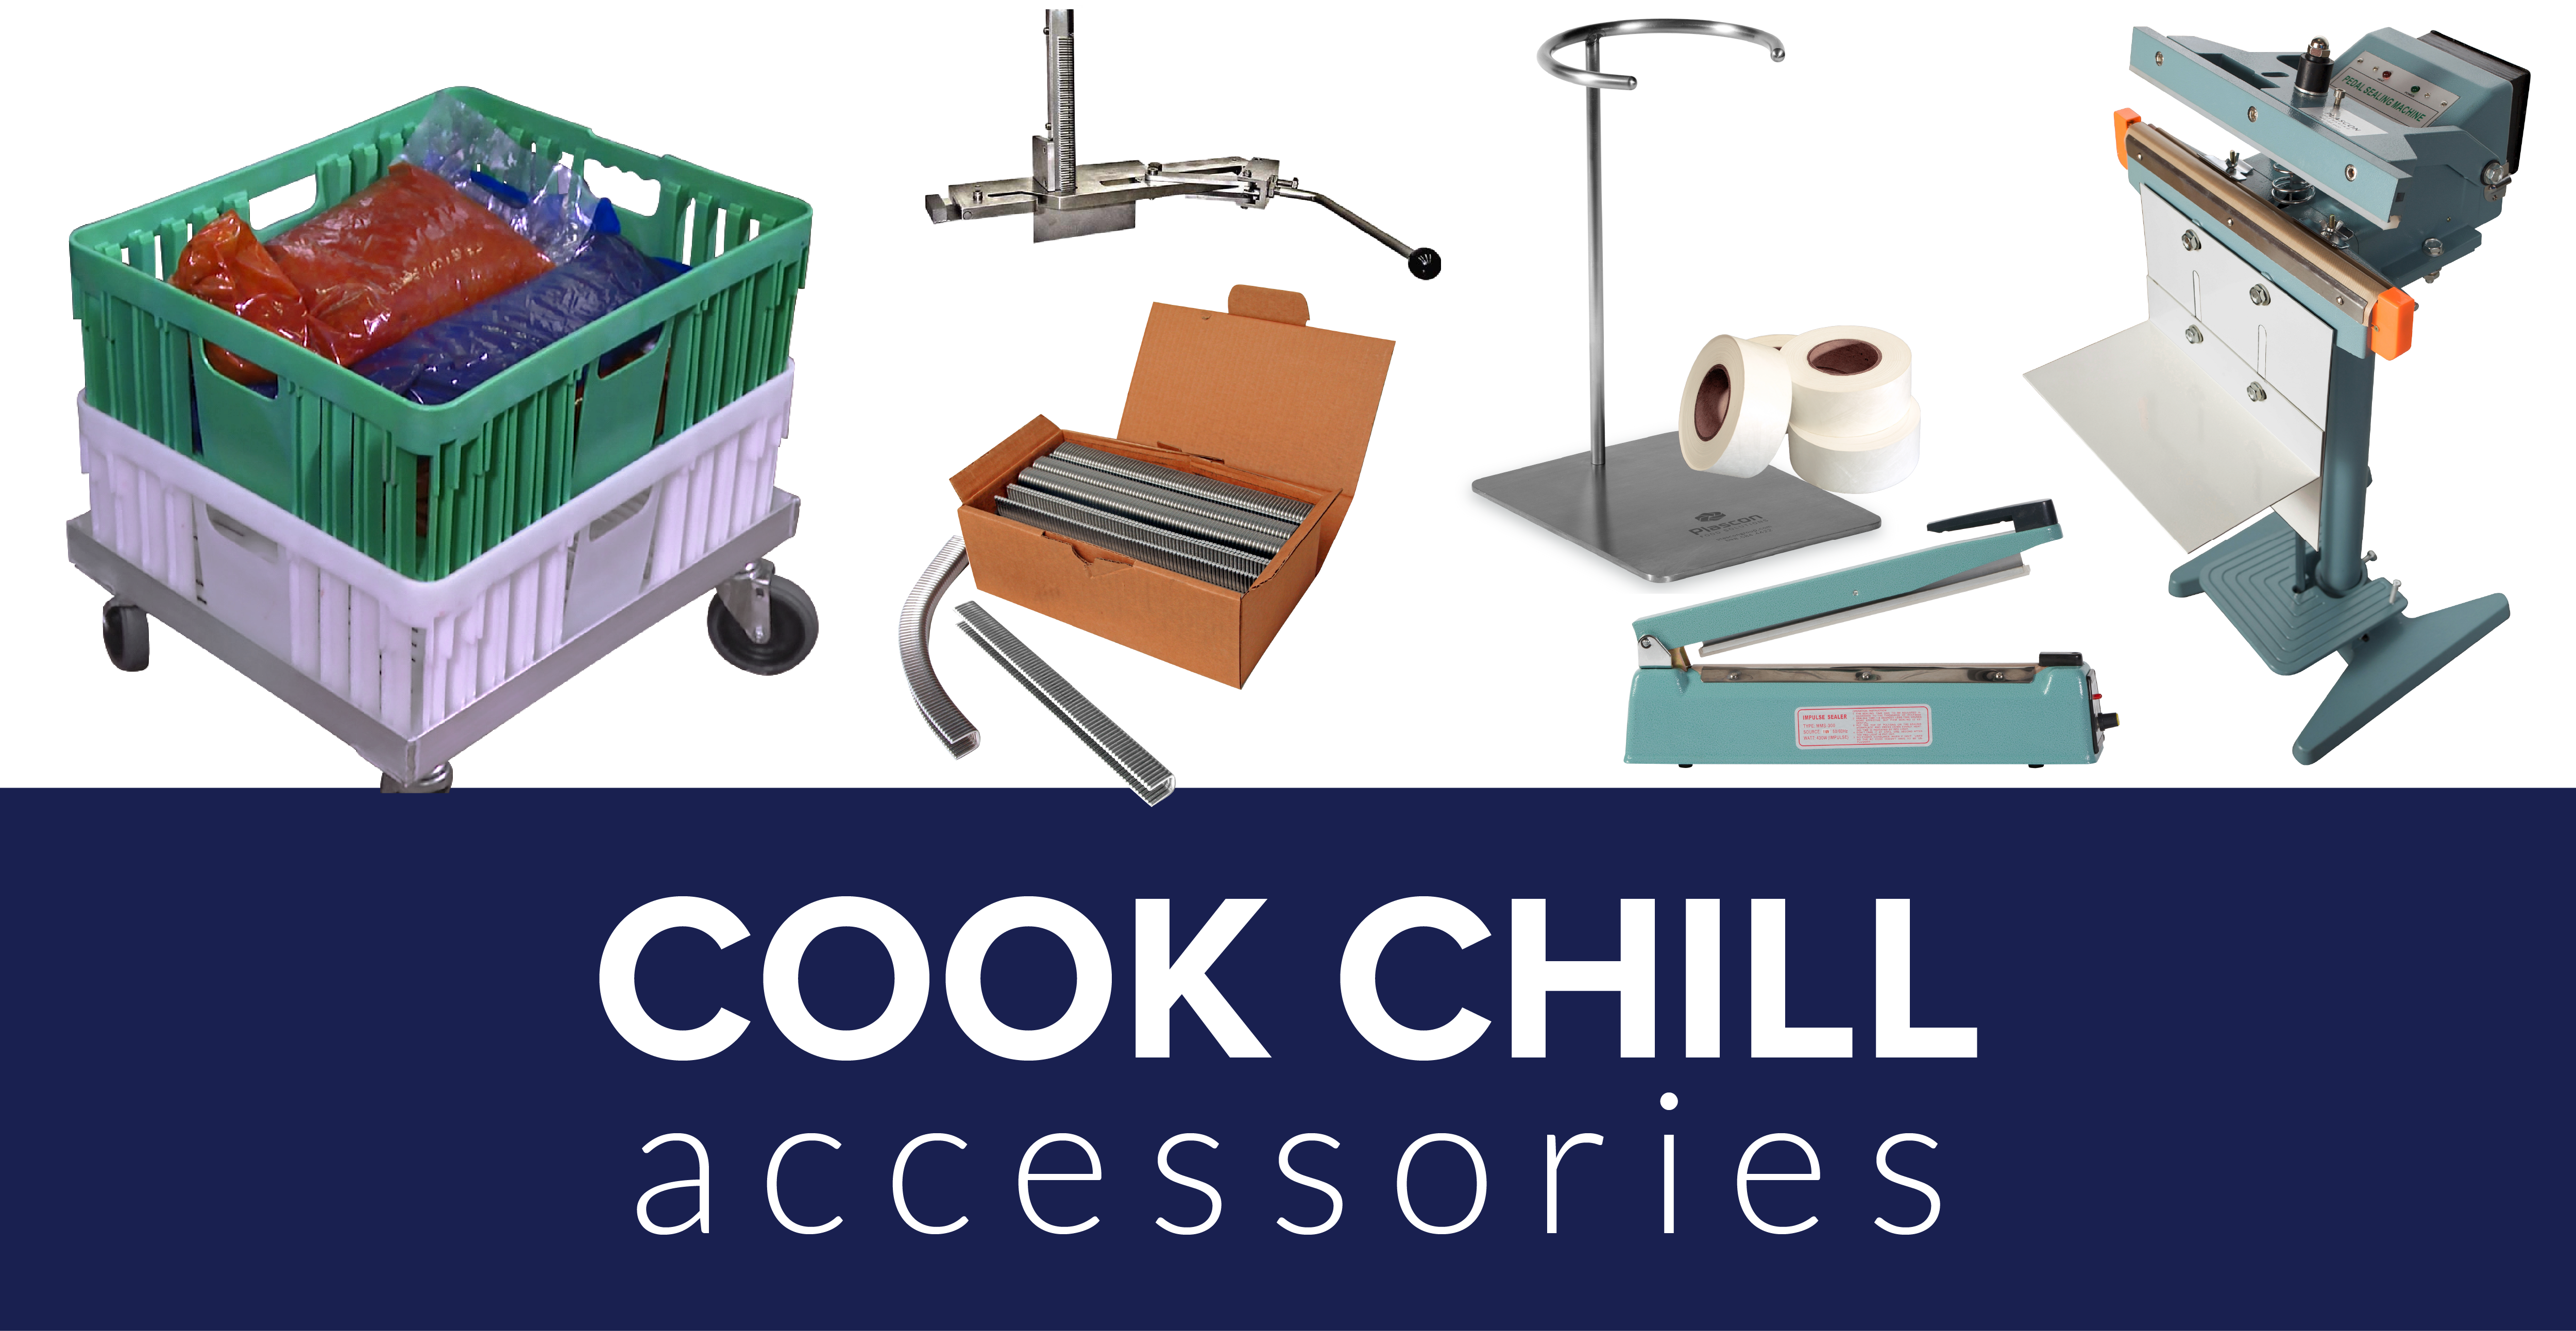 The Top Accessories You Need for Your Cook Chill System